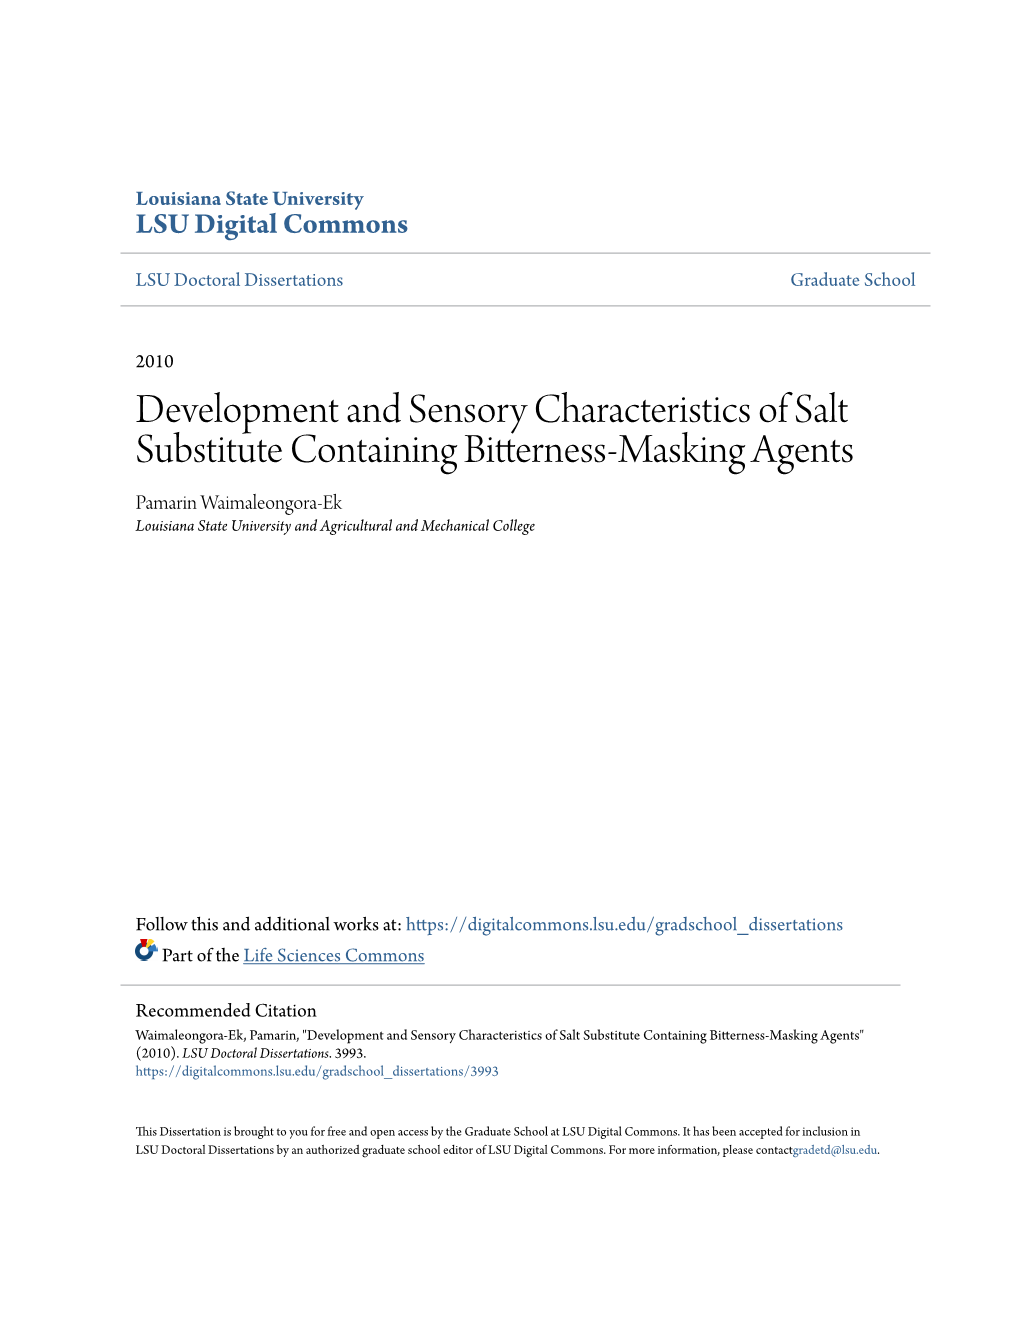 Development and Sensory Characteristics of Salt Substitute Containing Bitterness-Masking Agents